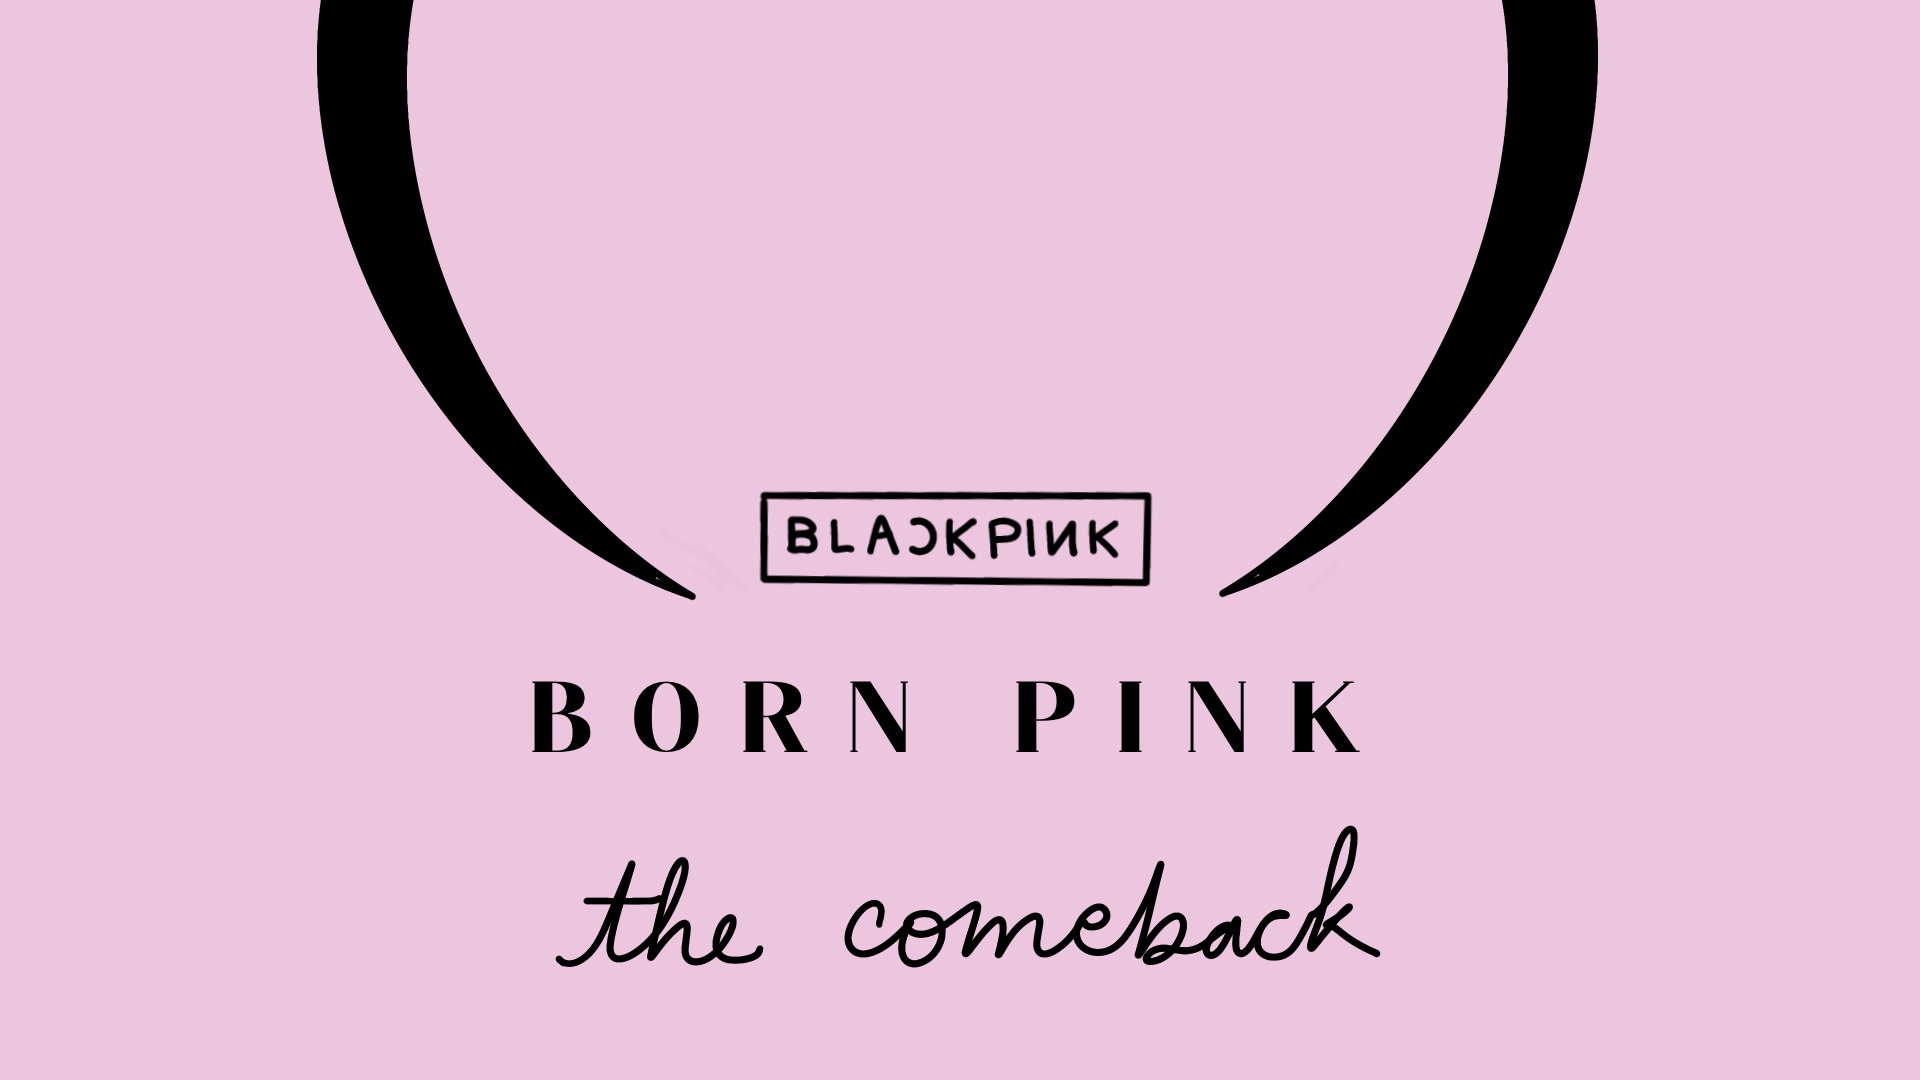 ALBUM REVIEW: BLACKPINK not backing down with "Born Pink"